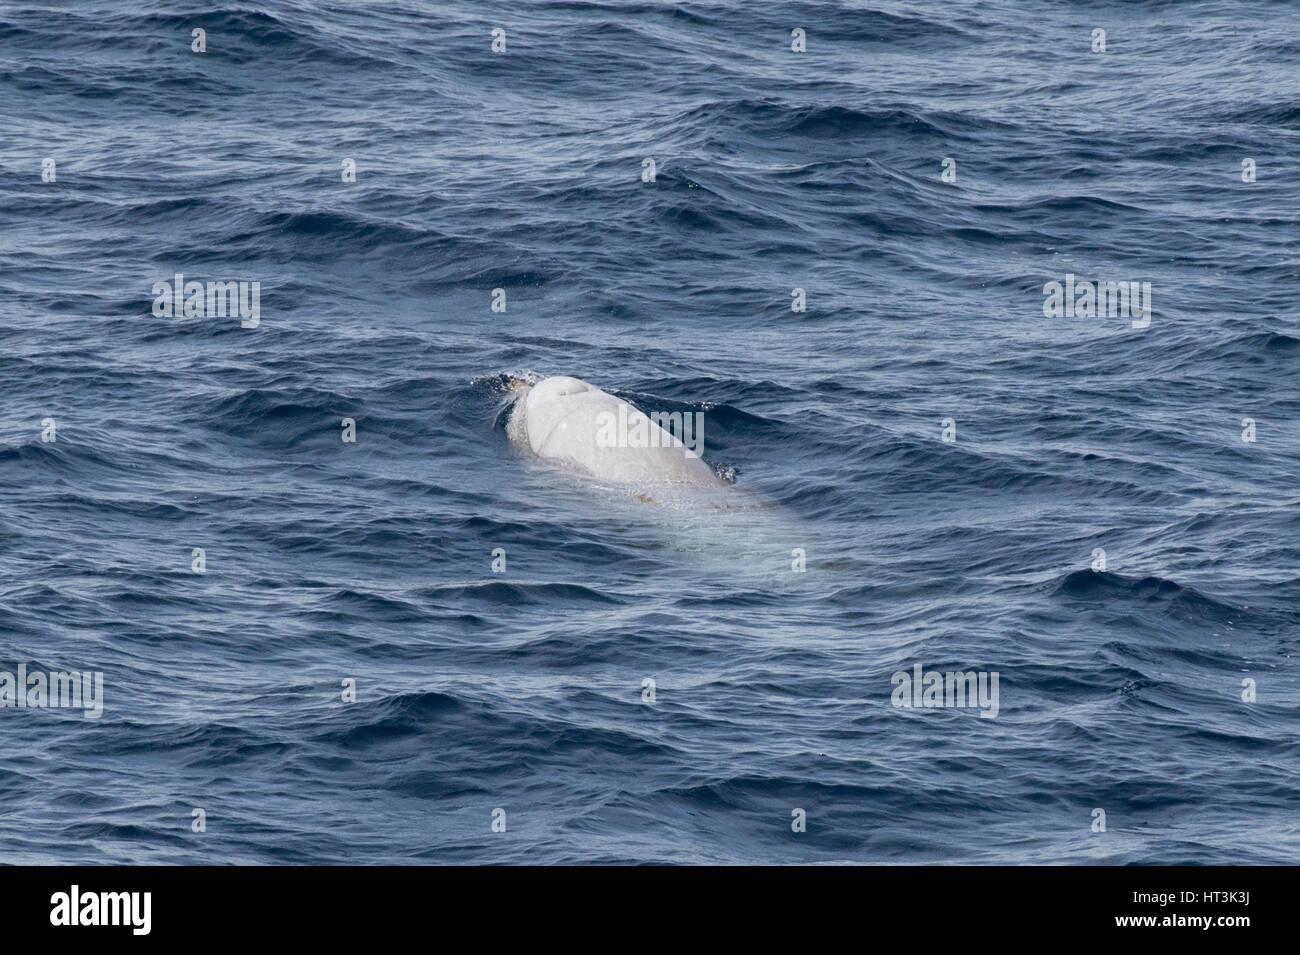 Male Cuvier's beaked whale or goose-beaked whale, Ziphius cavirostris, surfacing several hundred miles off Mauritania, North Africa Stock Photo